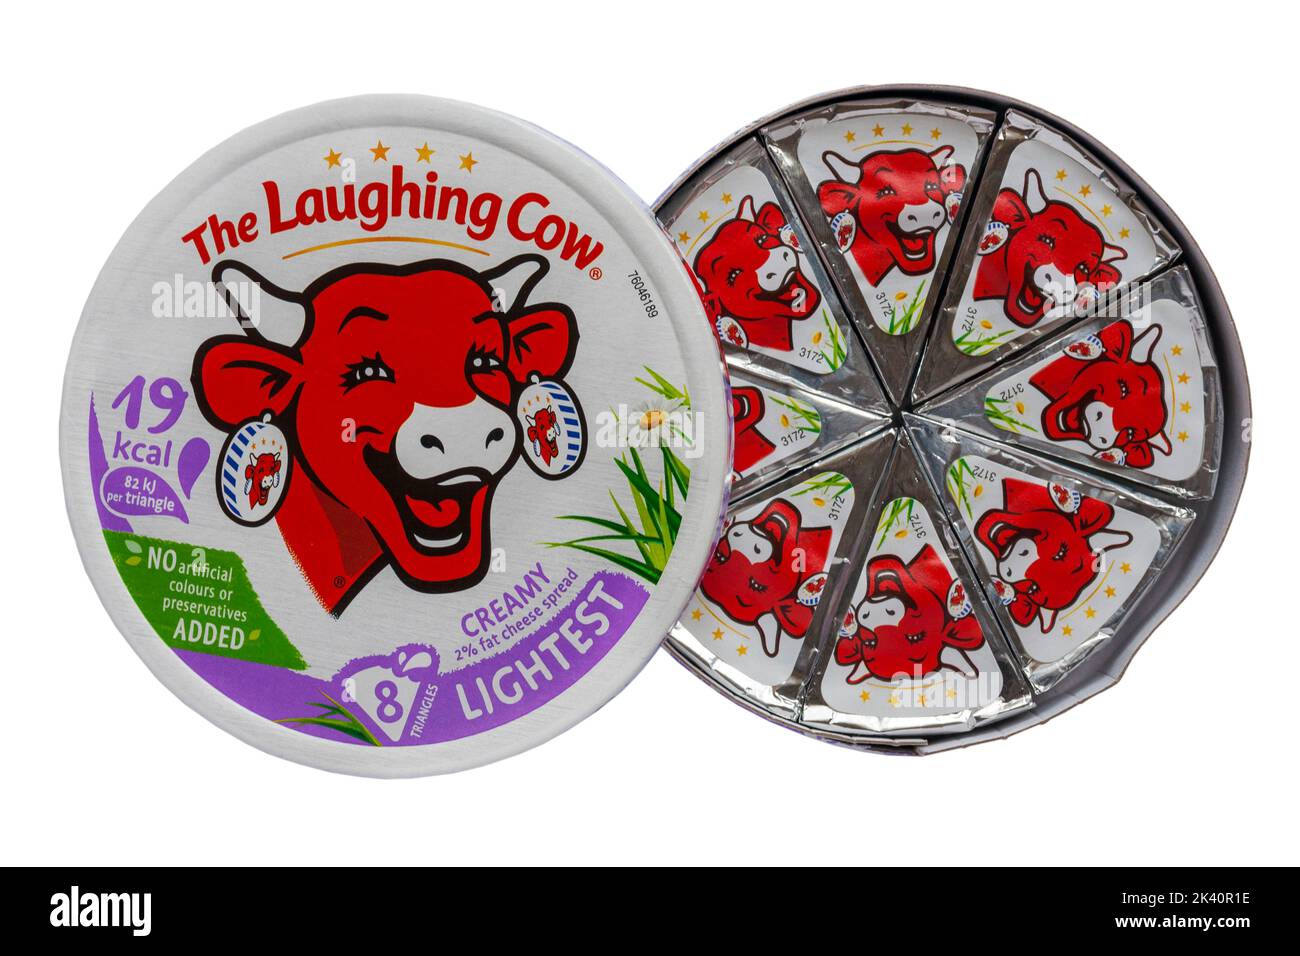 Packet of The Laughing Cow Lightest creamy 2% fat cheese spread with lid removed to show contents isolated on white background Stock Photo